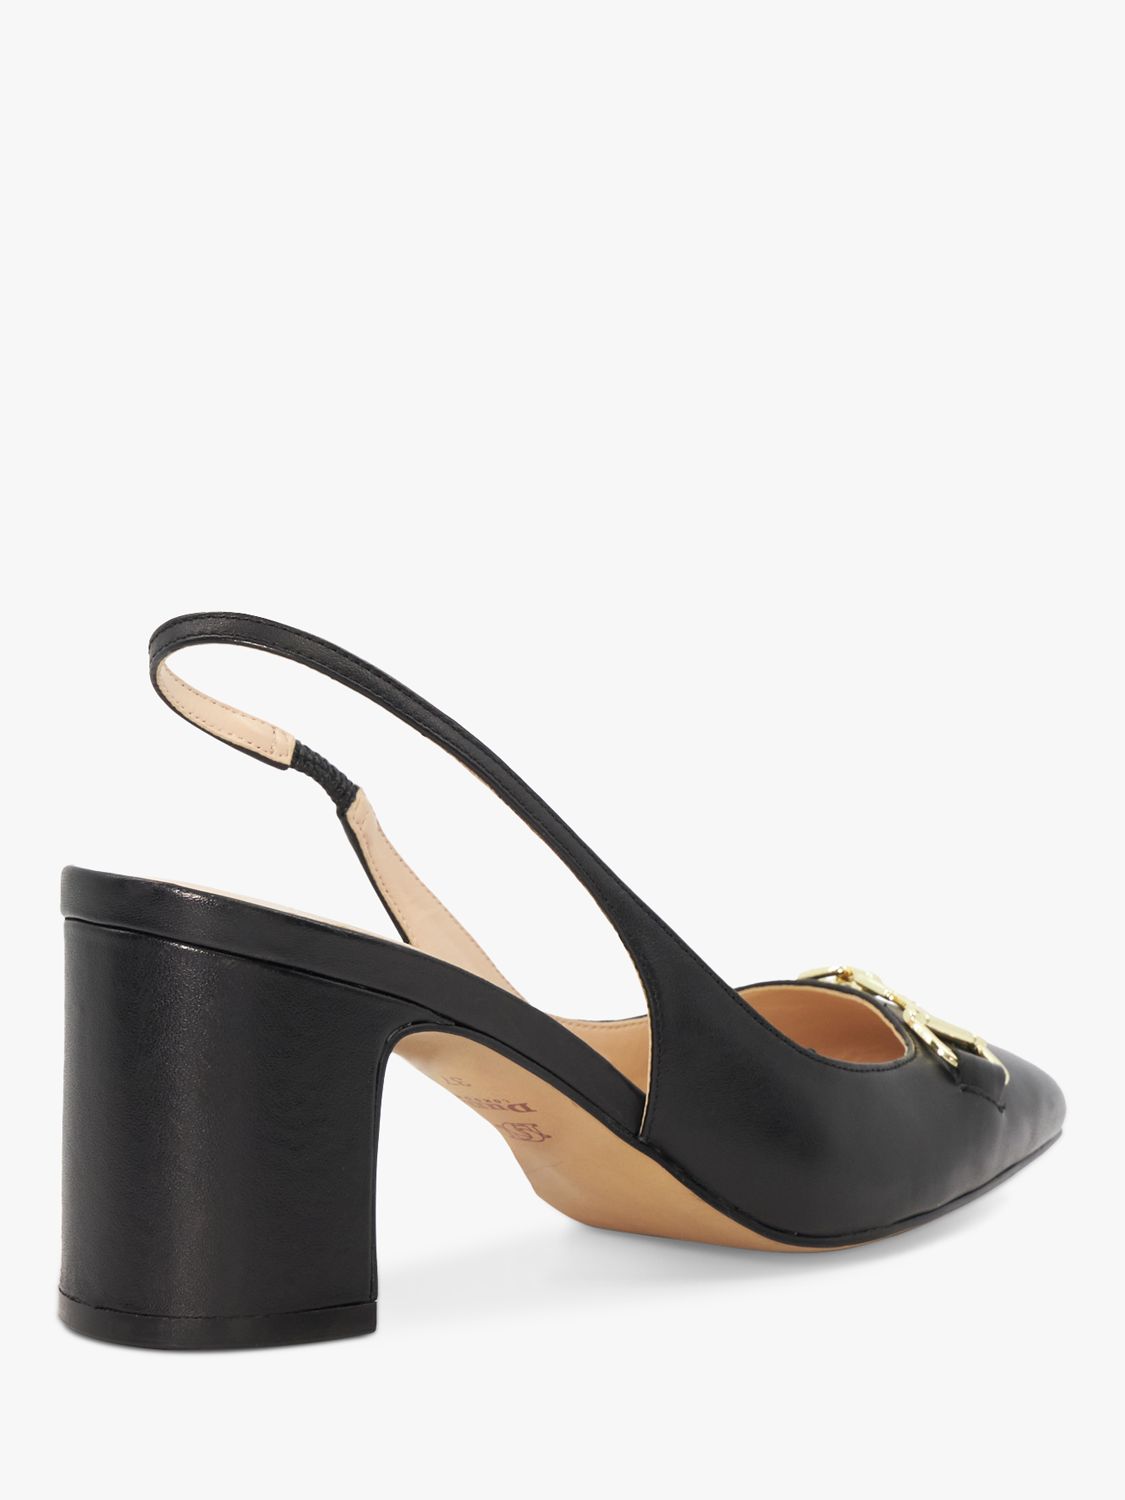 Buy Dune Wide Fit Detailed Leather Court Shoes, Black Online at johnlewis.com